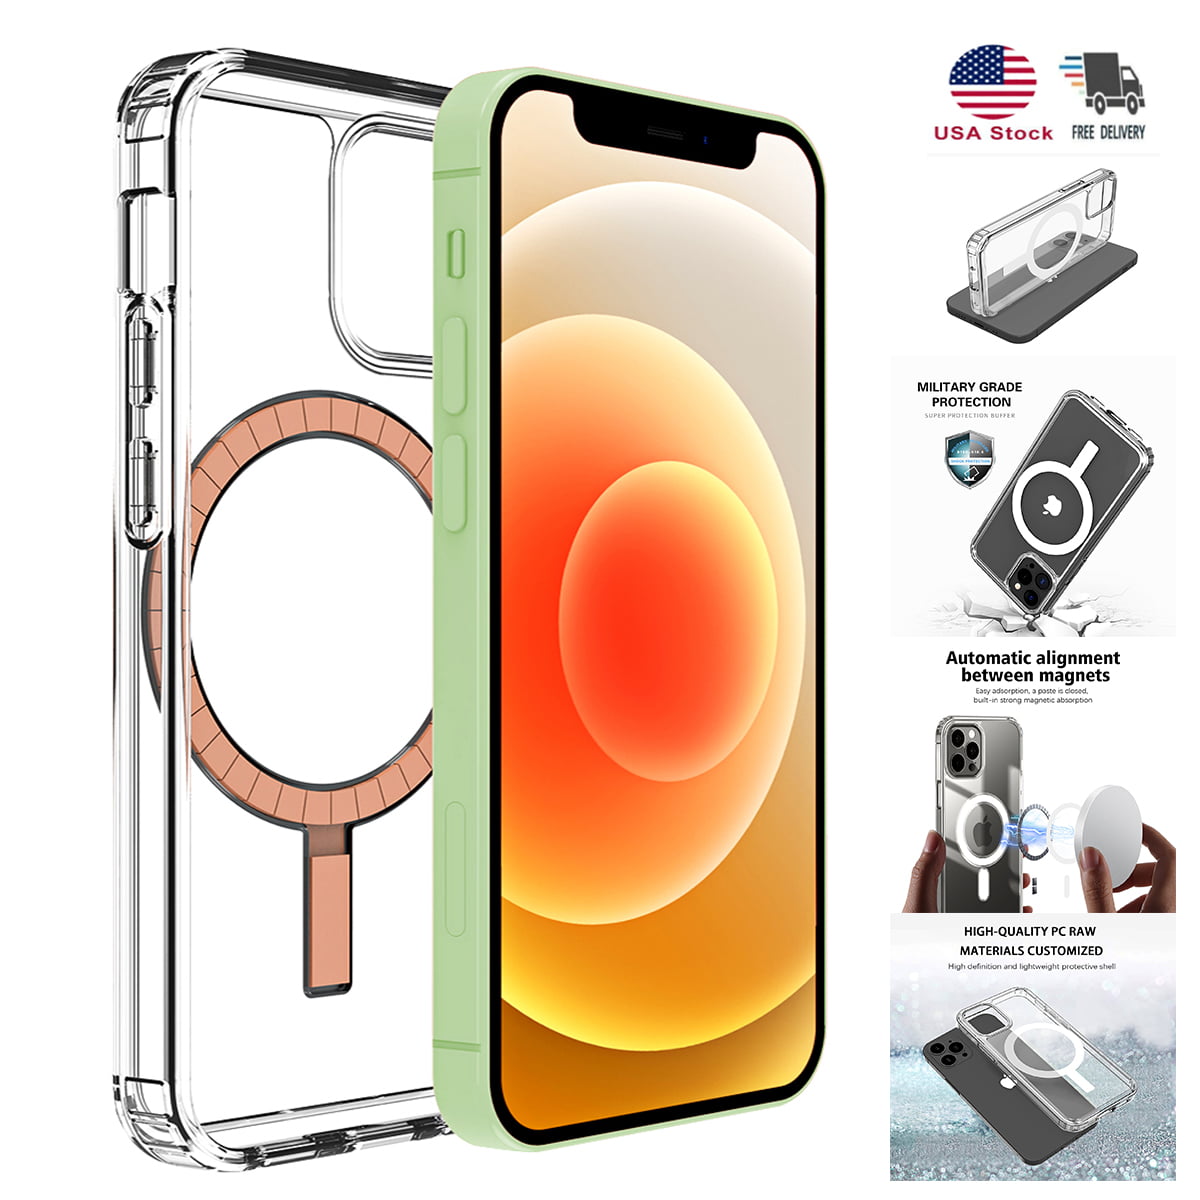 For Iphone 12 Pro Max Iphone 12 Iphone 12 Mini Magsafe Case Clear Transparent Slim Shockproof Bumper Magnetic Cover Compatible With Magsafe Charger For Iphone 12 Series Walmart Com Walmart Com